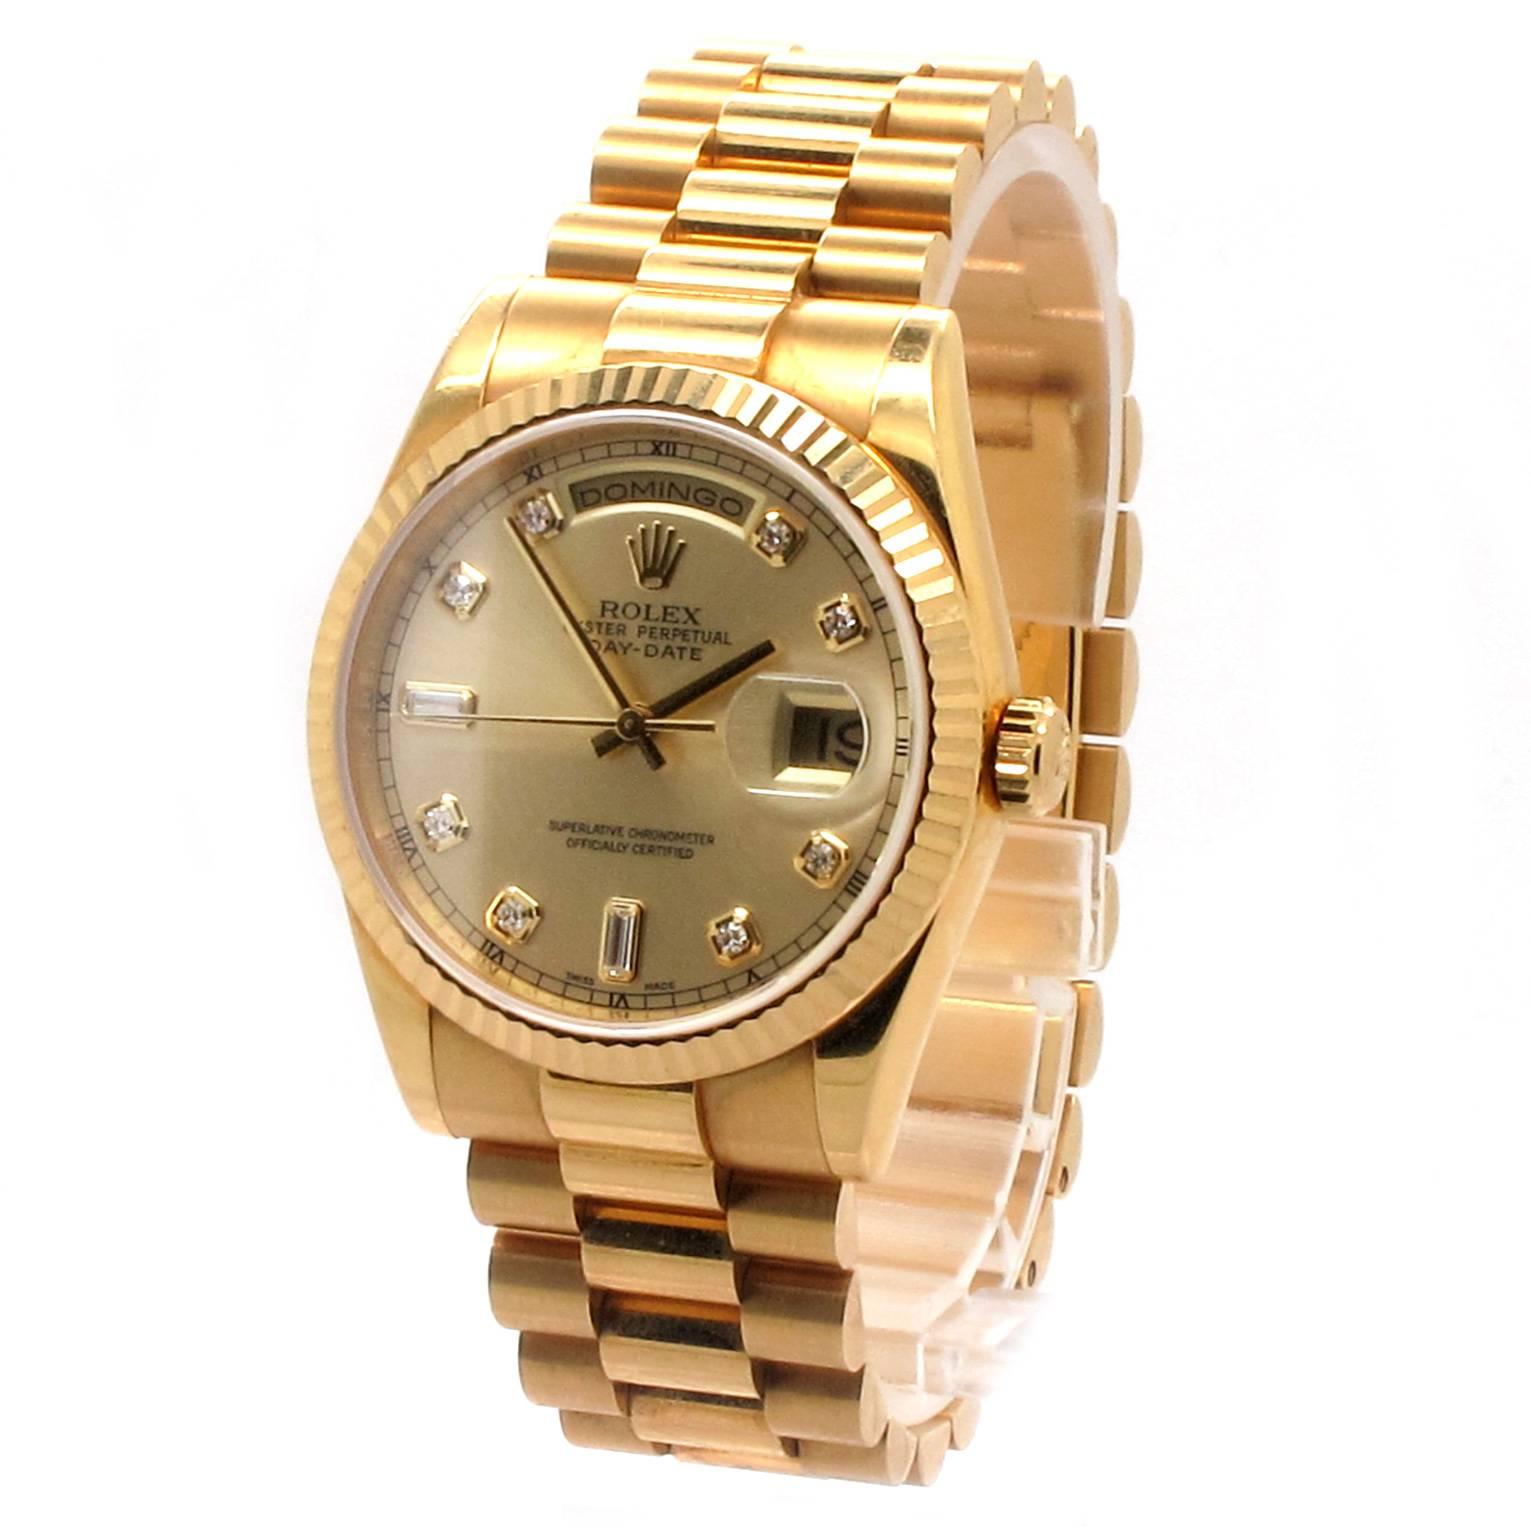 Pre-owned Rolex Day-Date Men's Presidential Watch with a round 36mm 18K Yellow Gold Case. 18K Yellow Gold Fluted Bezel with a Original Champagne Diamond Dial. 18K Yellow Gold President 